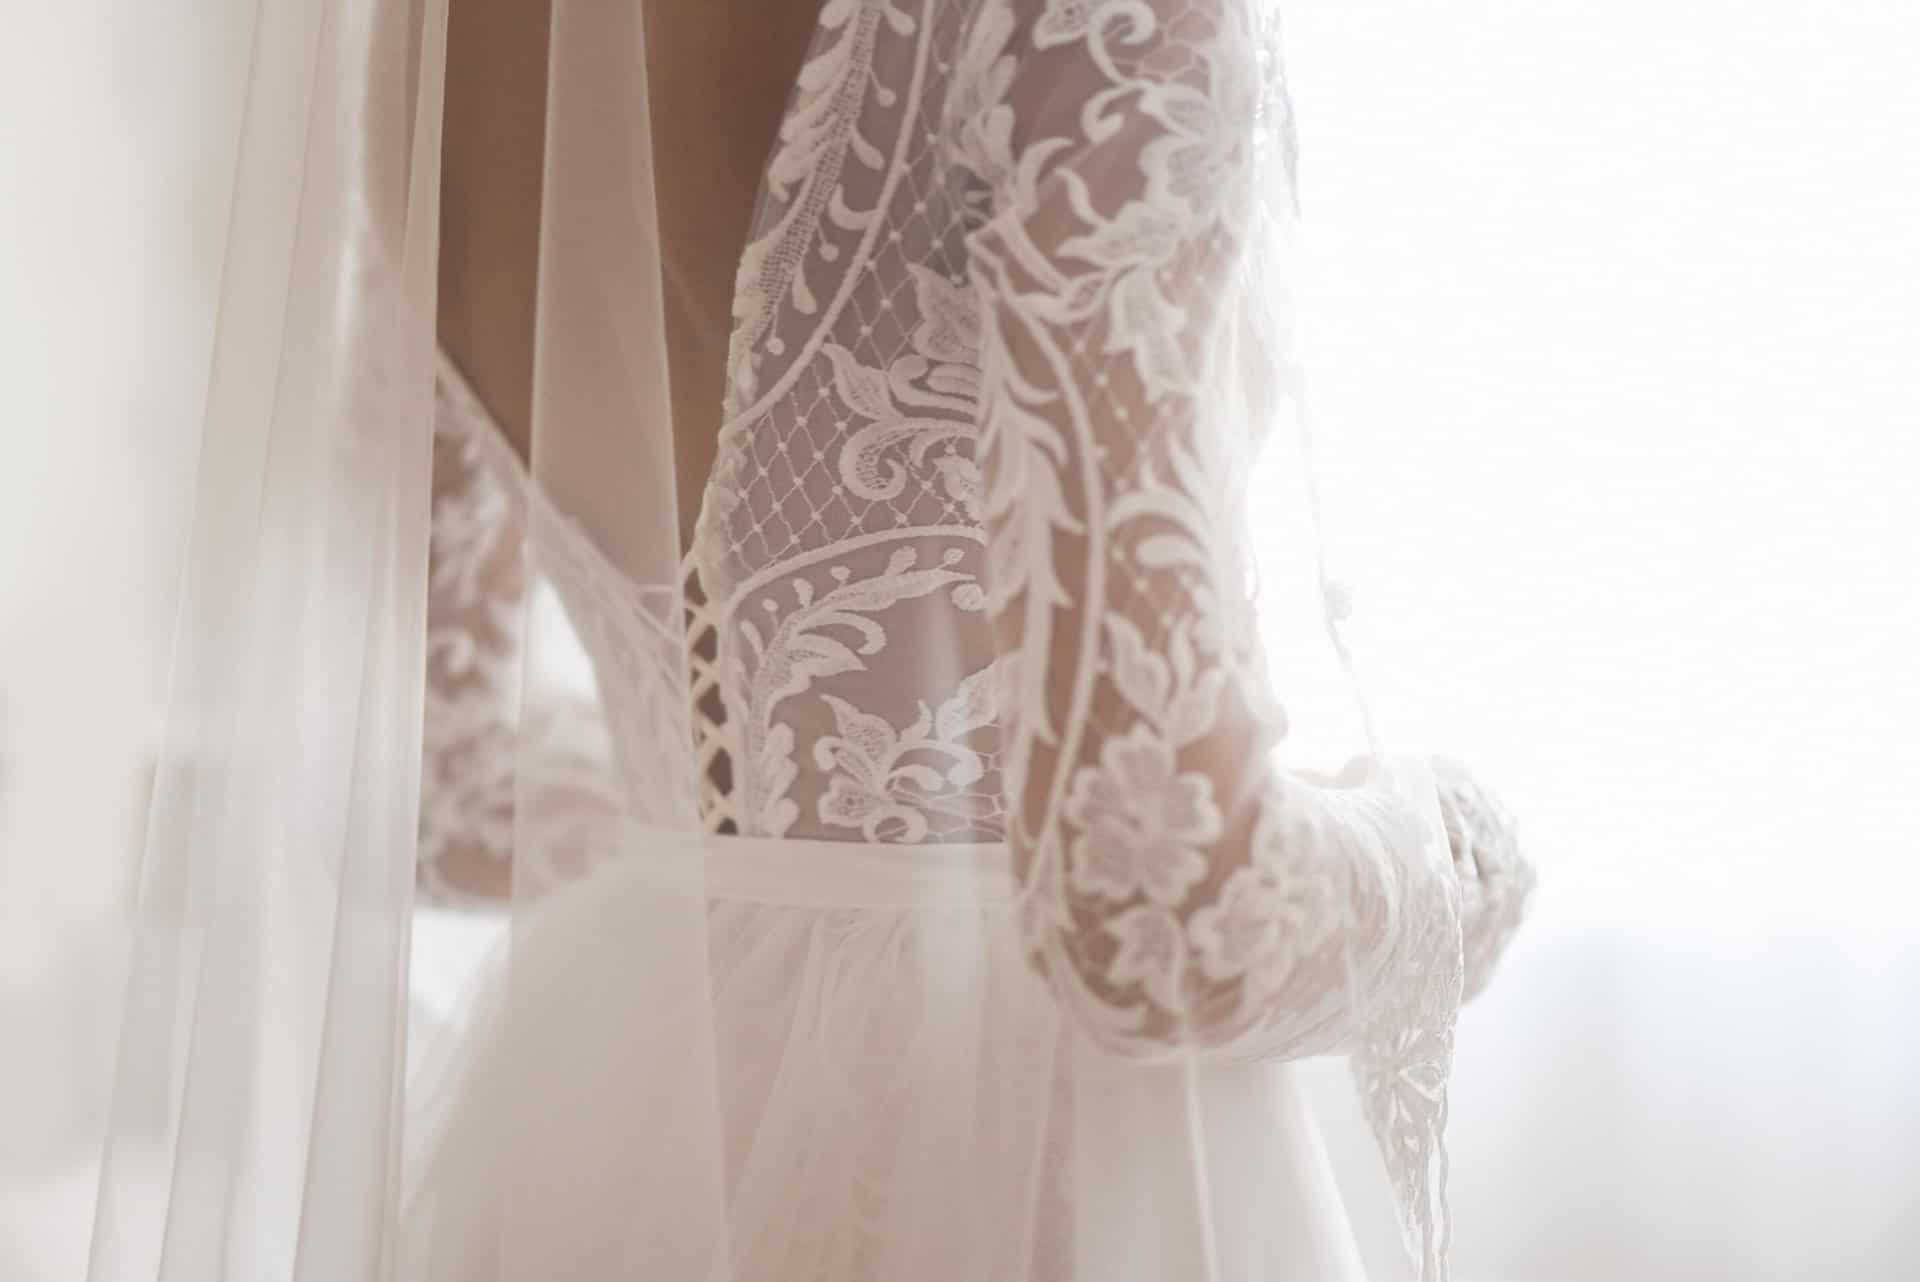 The Wedding Veil Lengths Guide: Get the Right Length for Your Dress ...